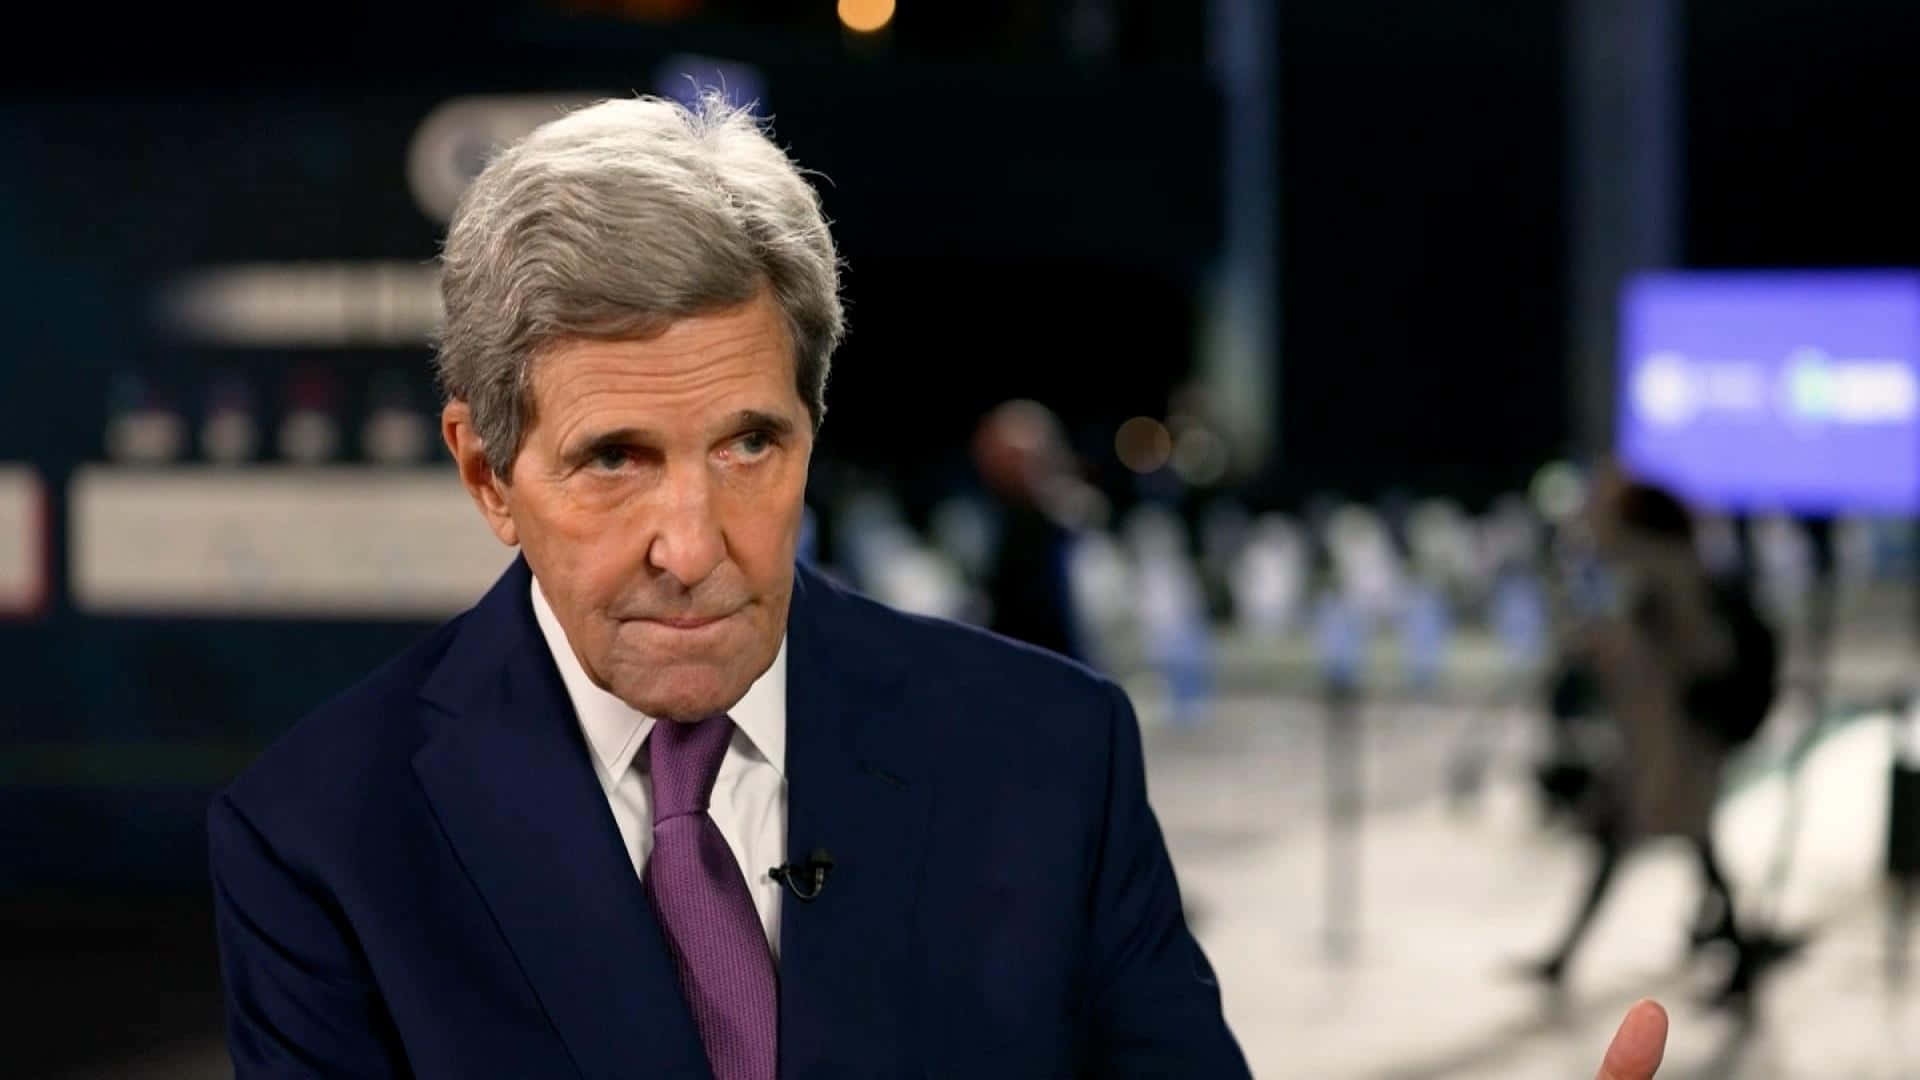 John Kerry During Interview With Christine Amanpour Wallpaper